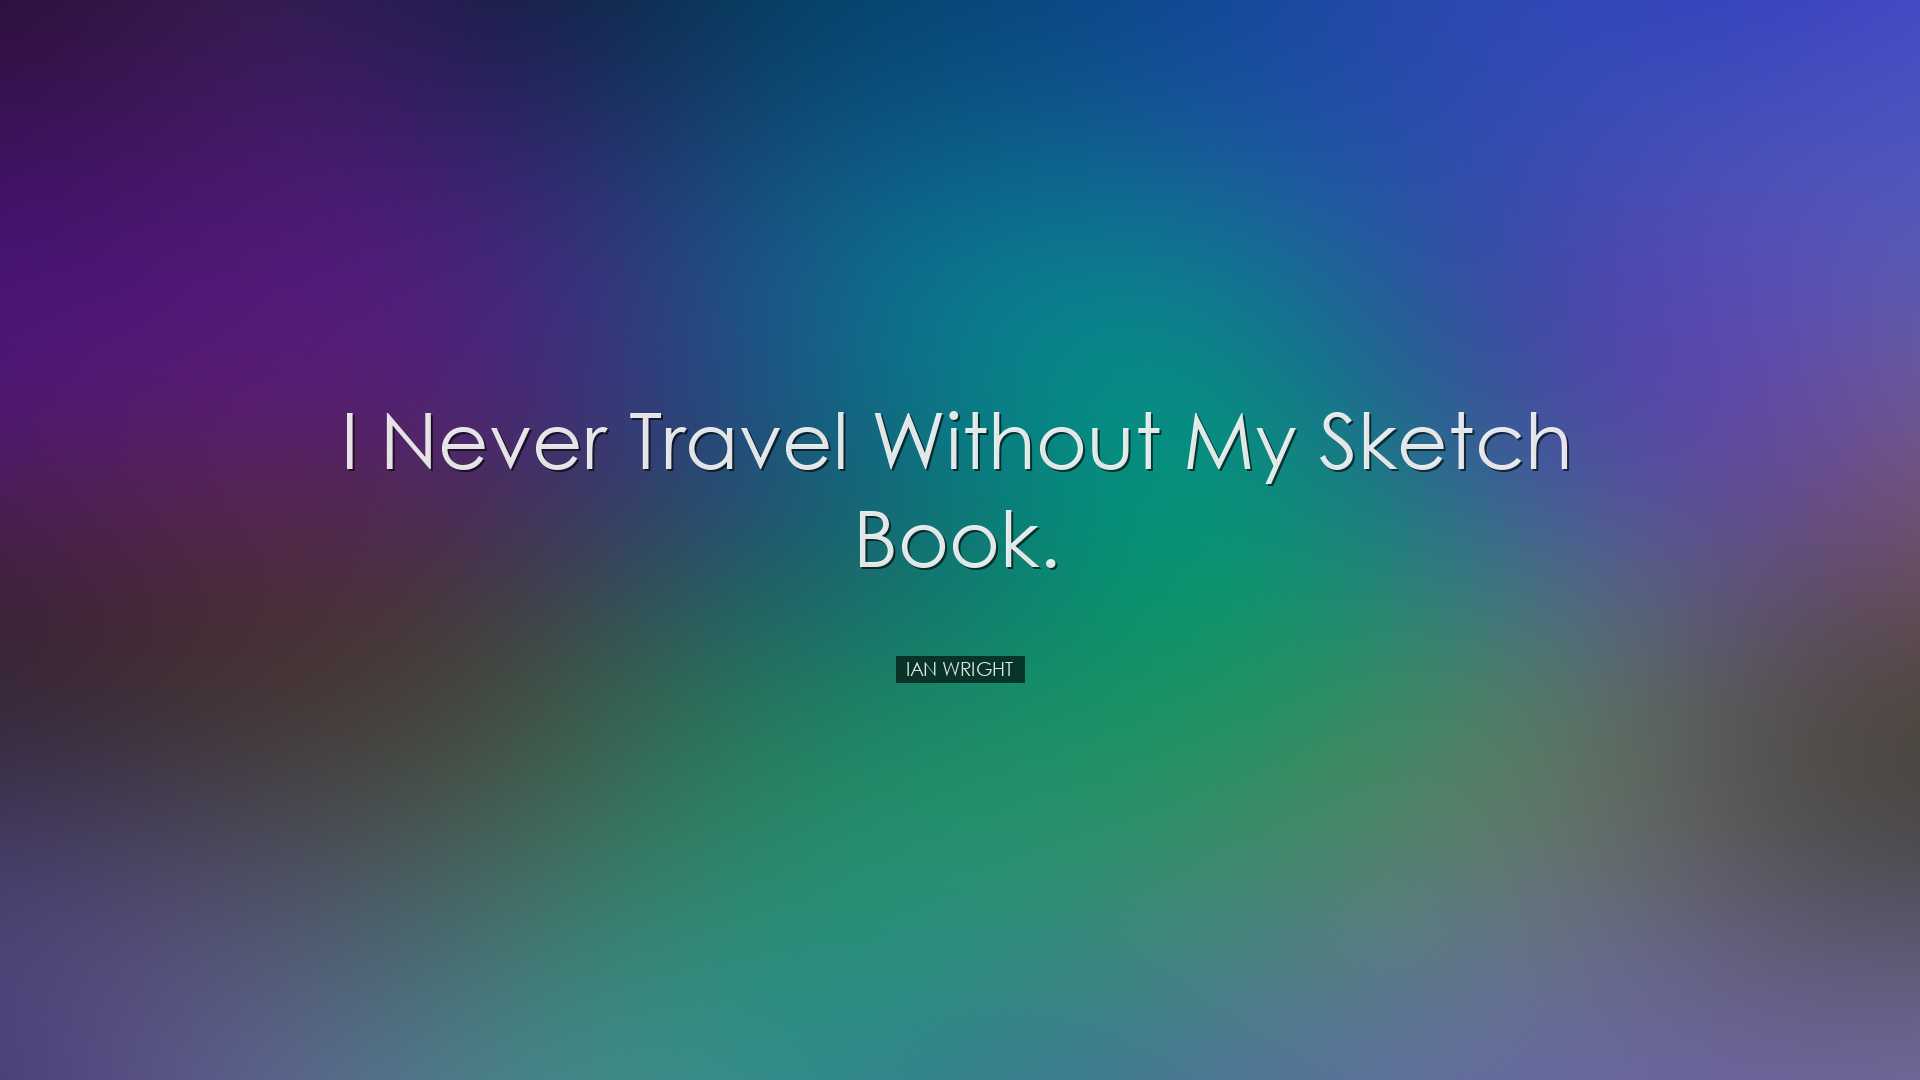 I never travel without my sketch book. - Ian Wright